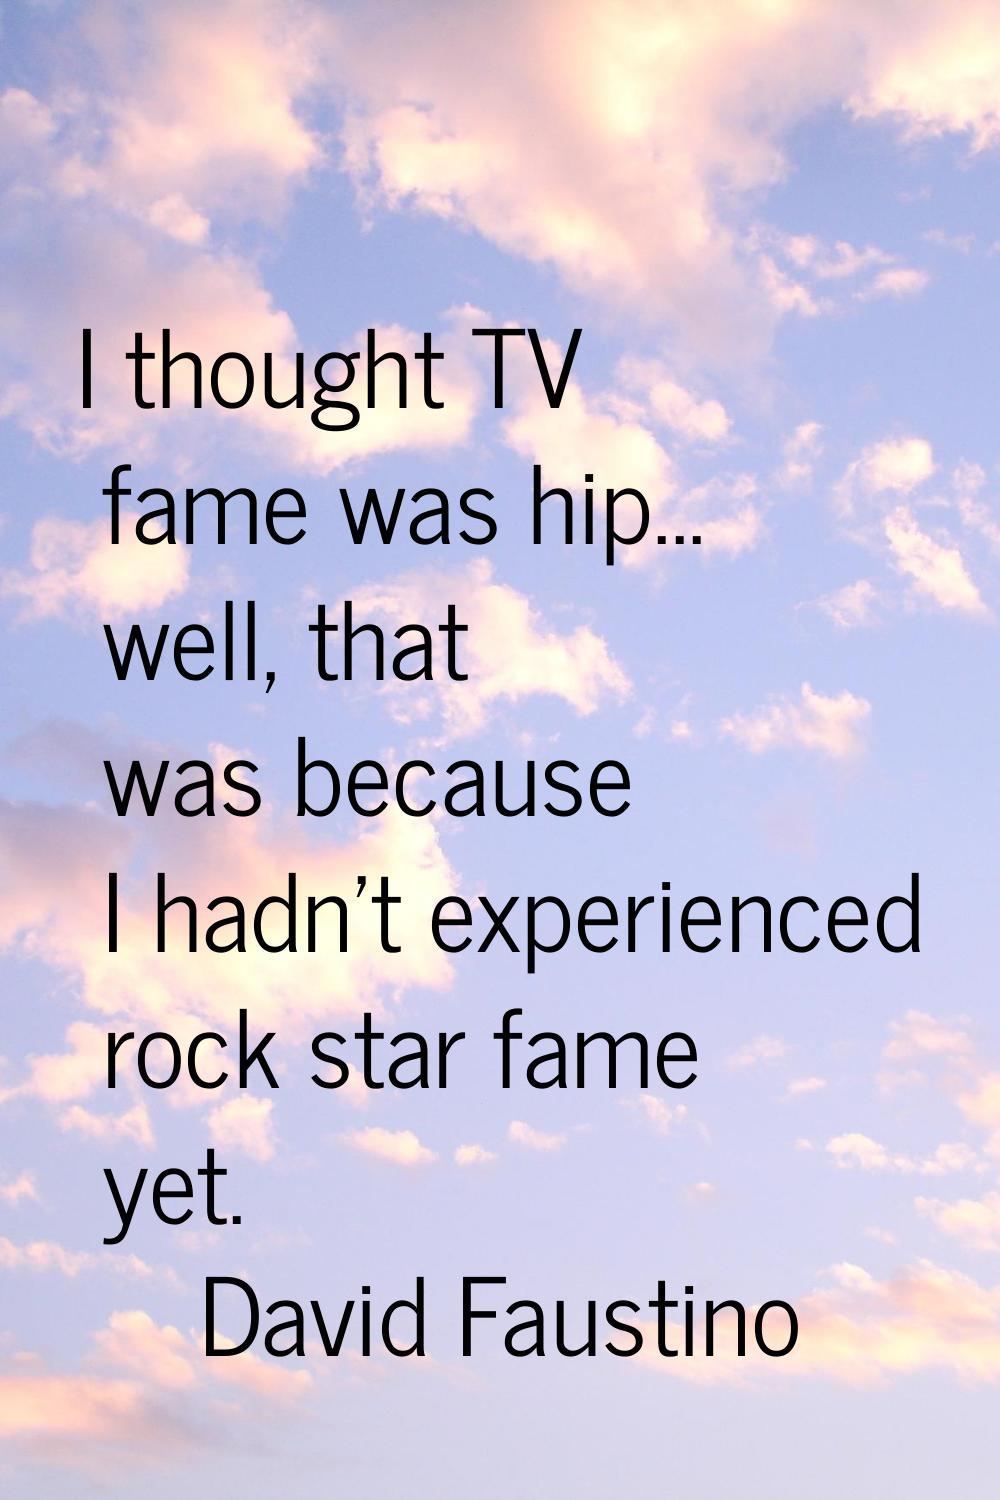 I thought TV fame was hip... well, that was because I hadn't experienced rock star fame yet.